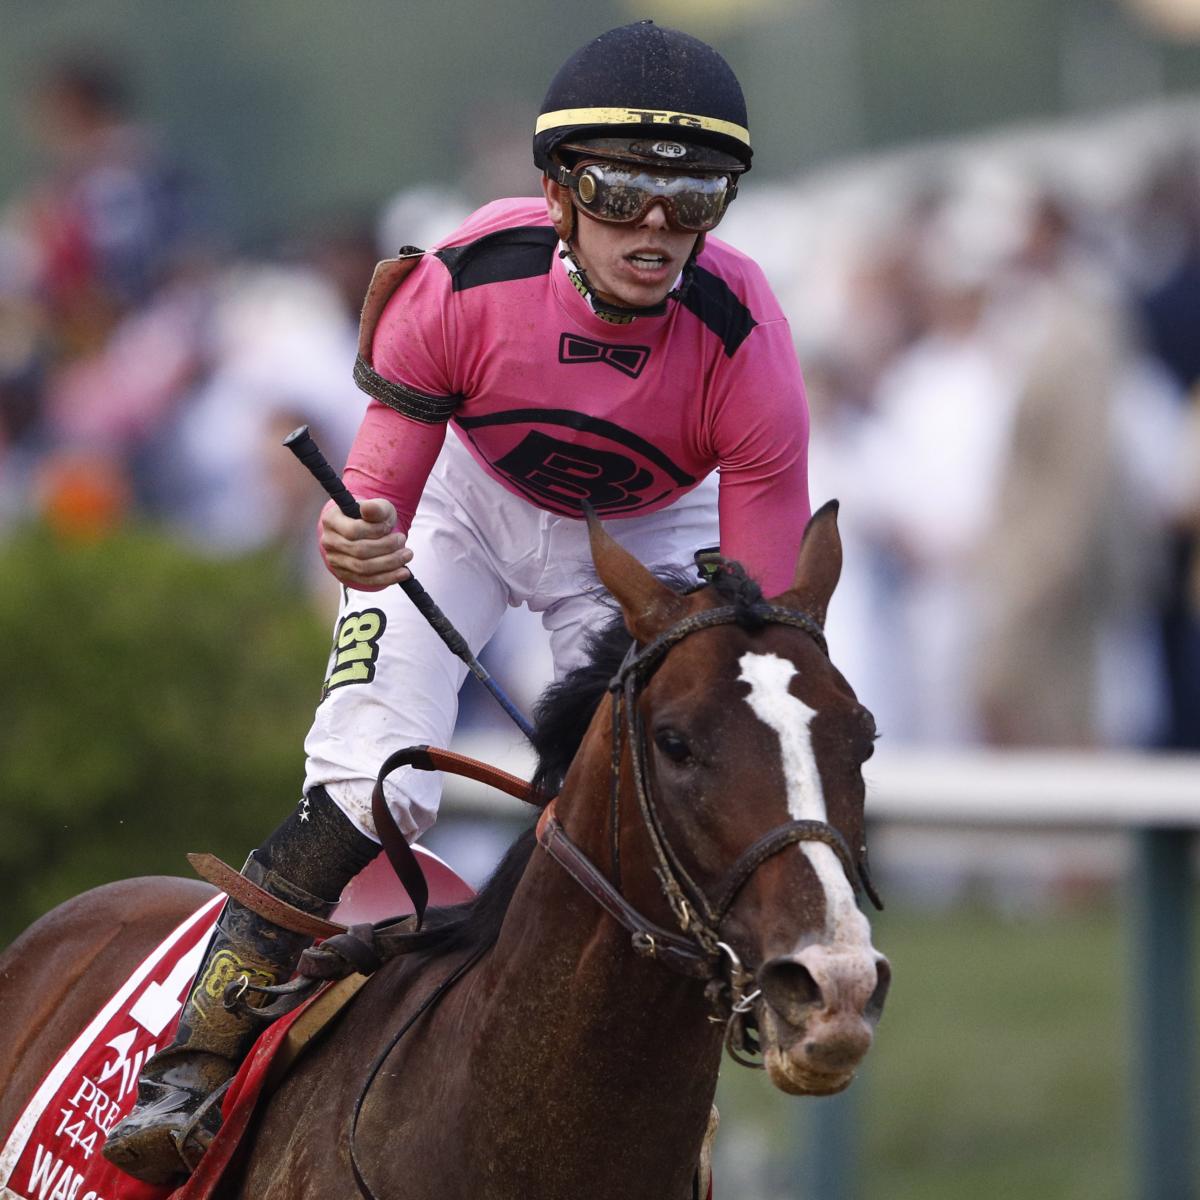 Preakness 2019 Full Results, Analysis and Video Highlights from